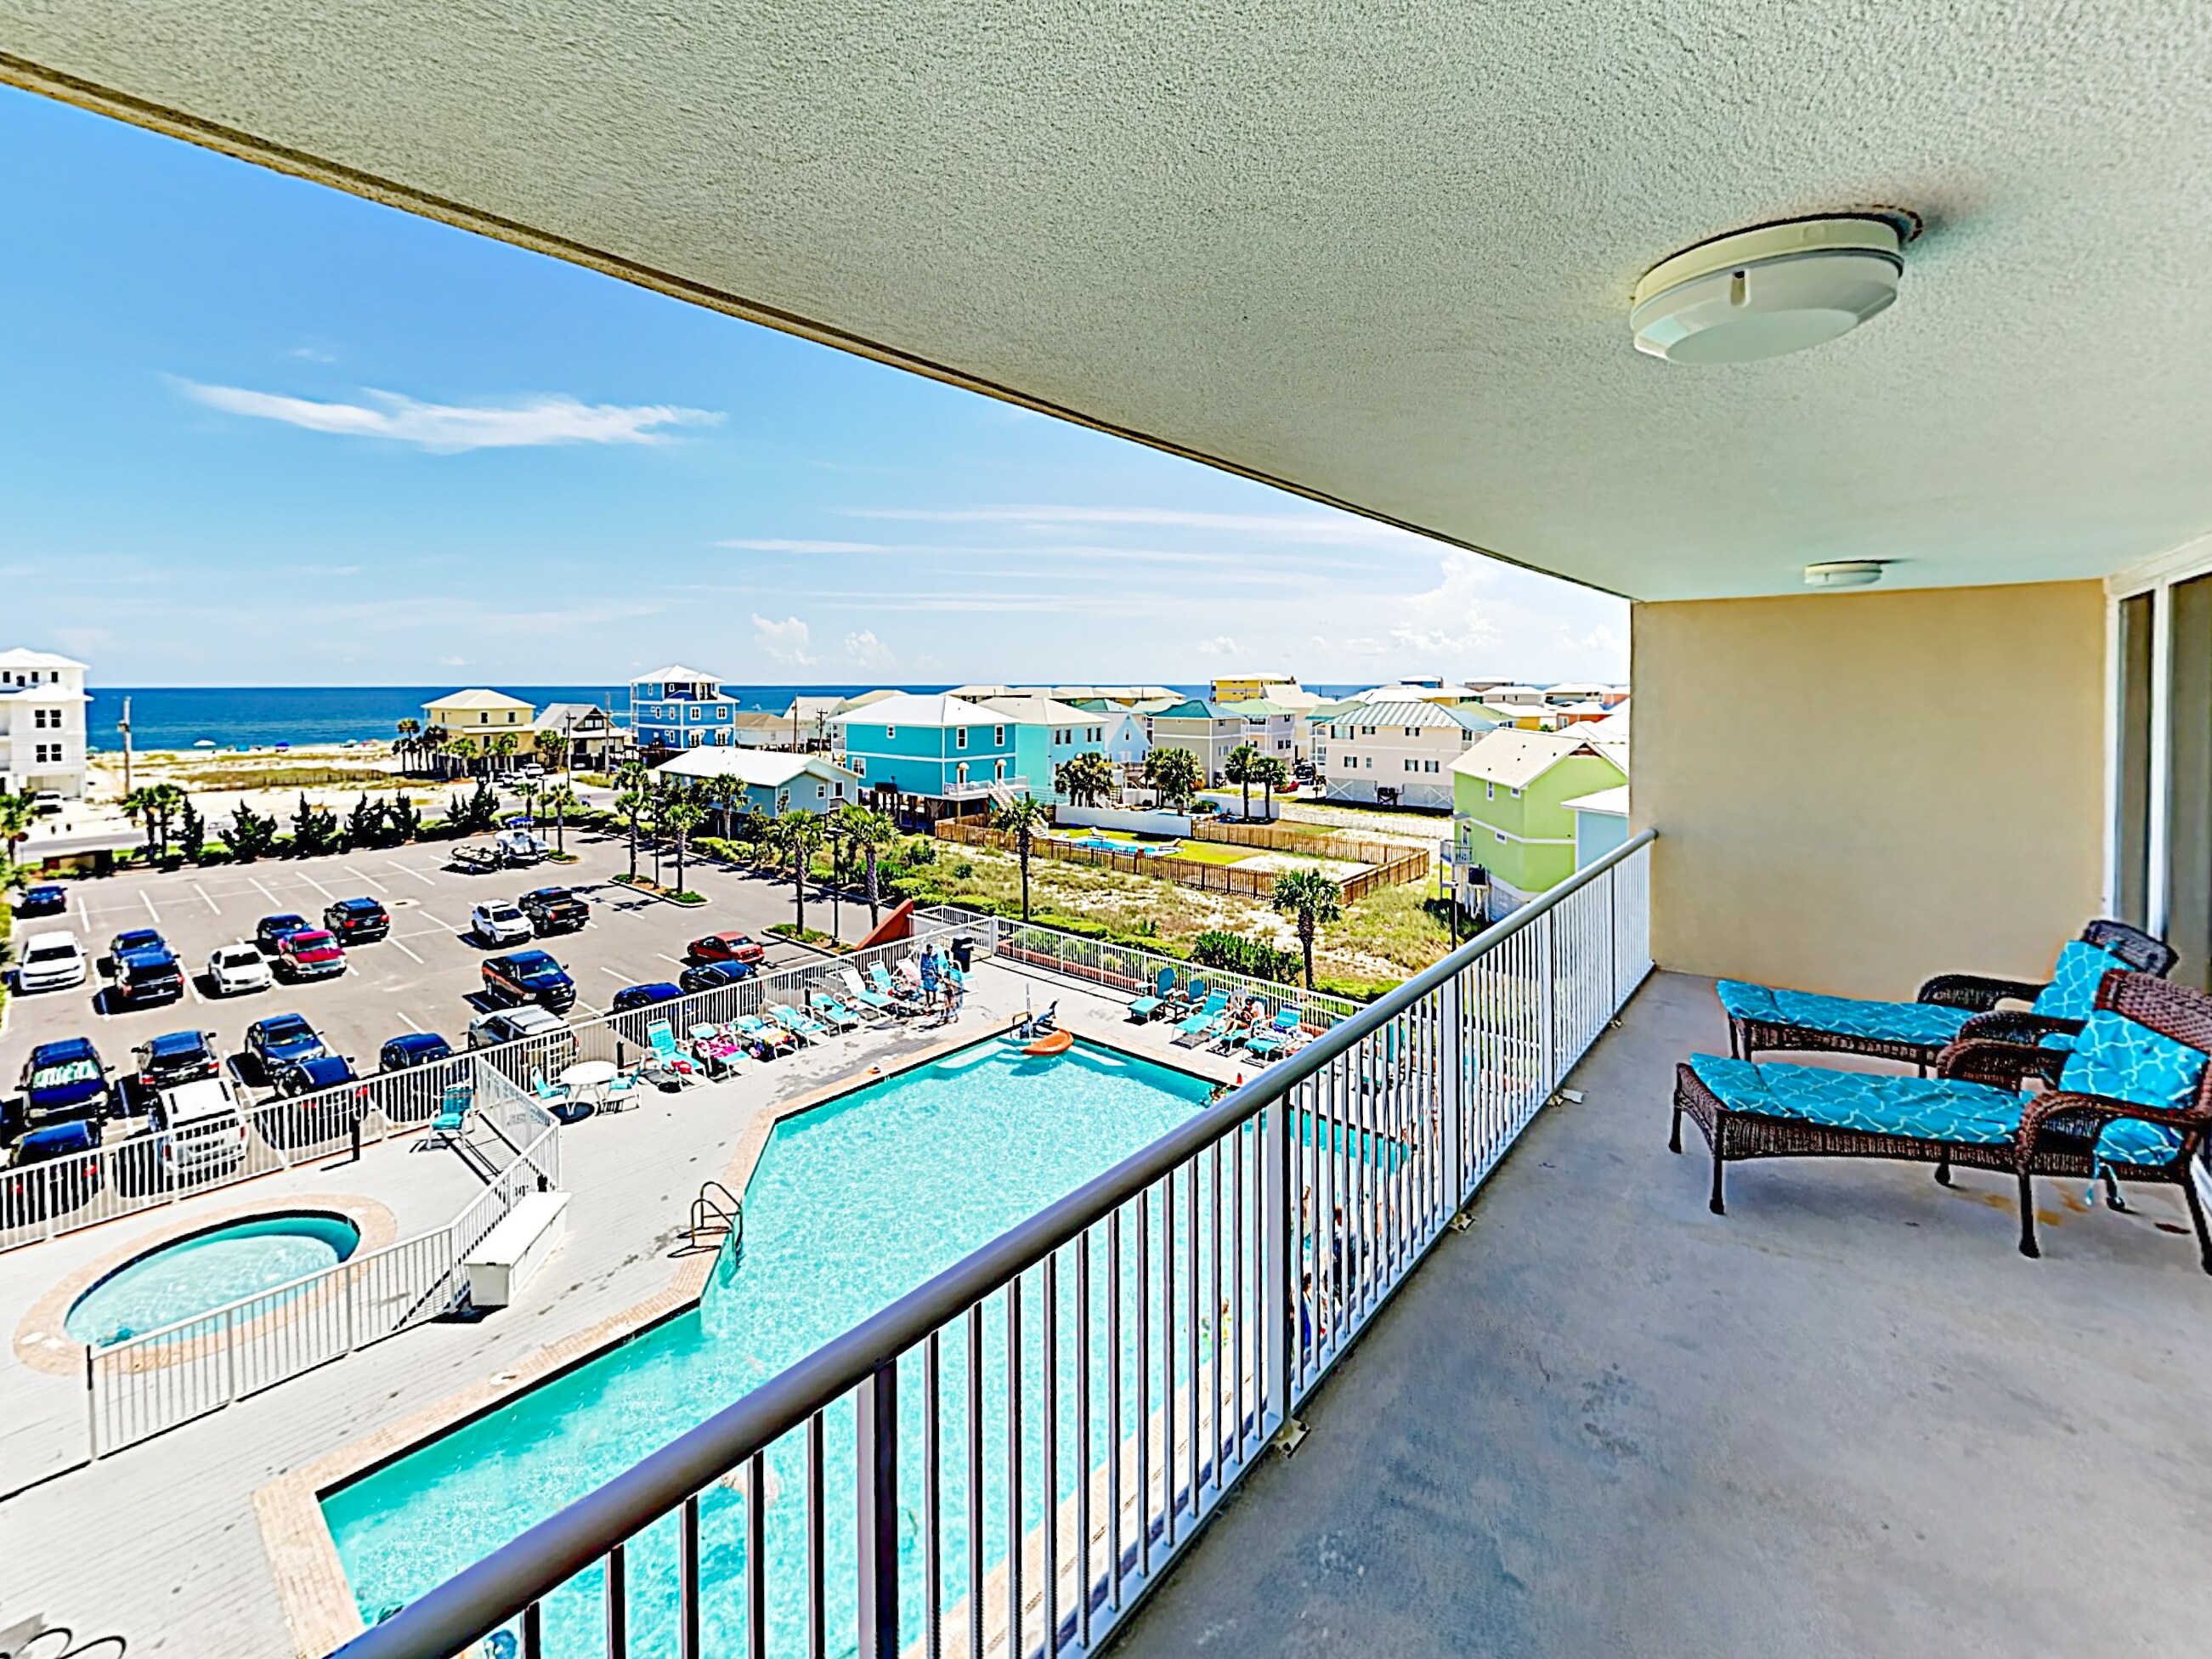 Welcome to Gulf Shores! This condo is professionally managed by TurnKey Vacation Rentals.